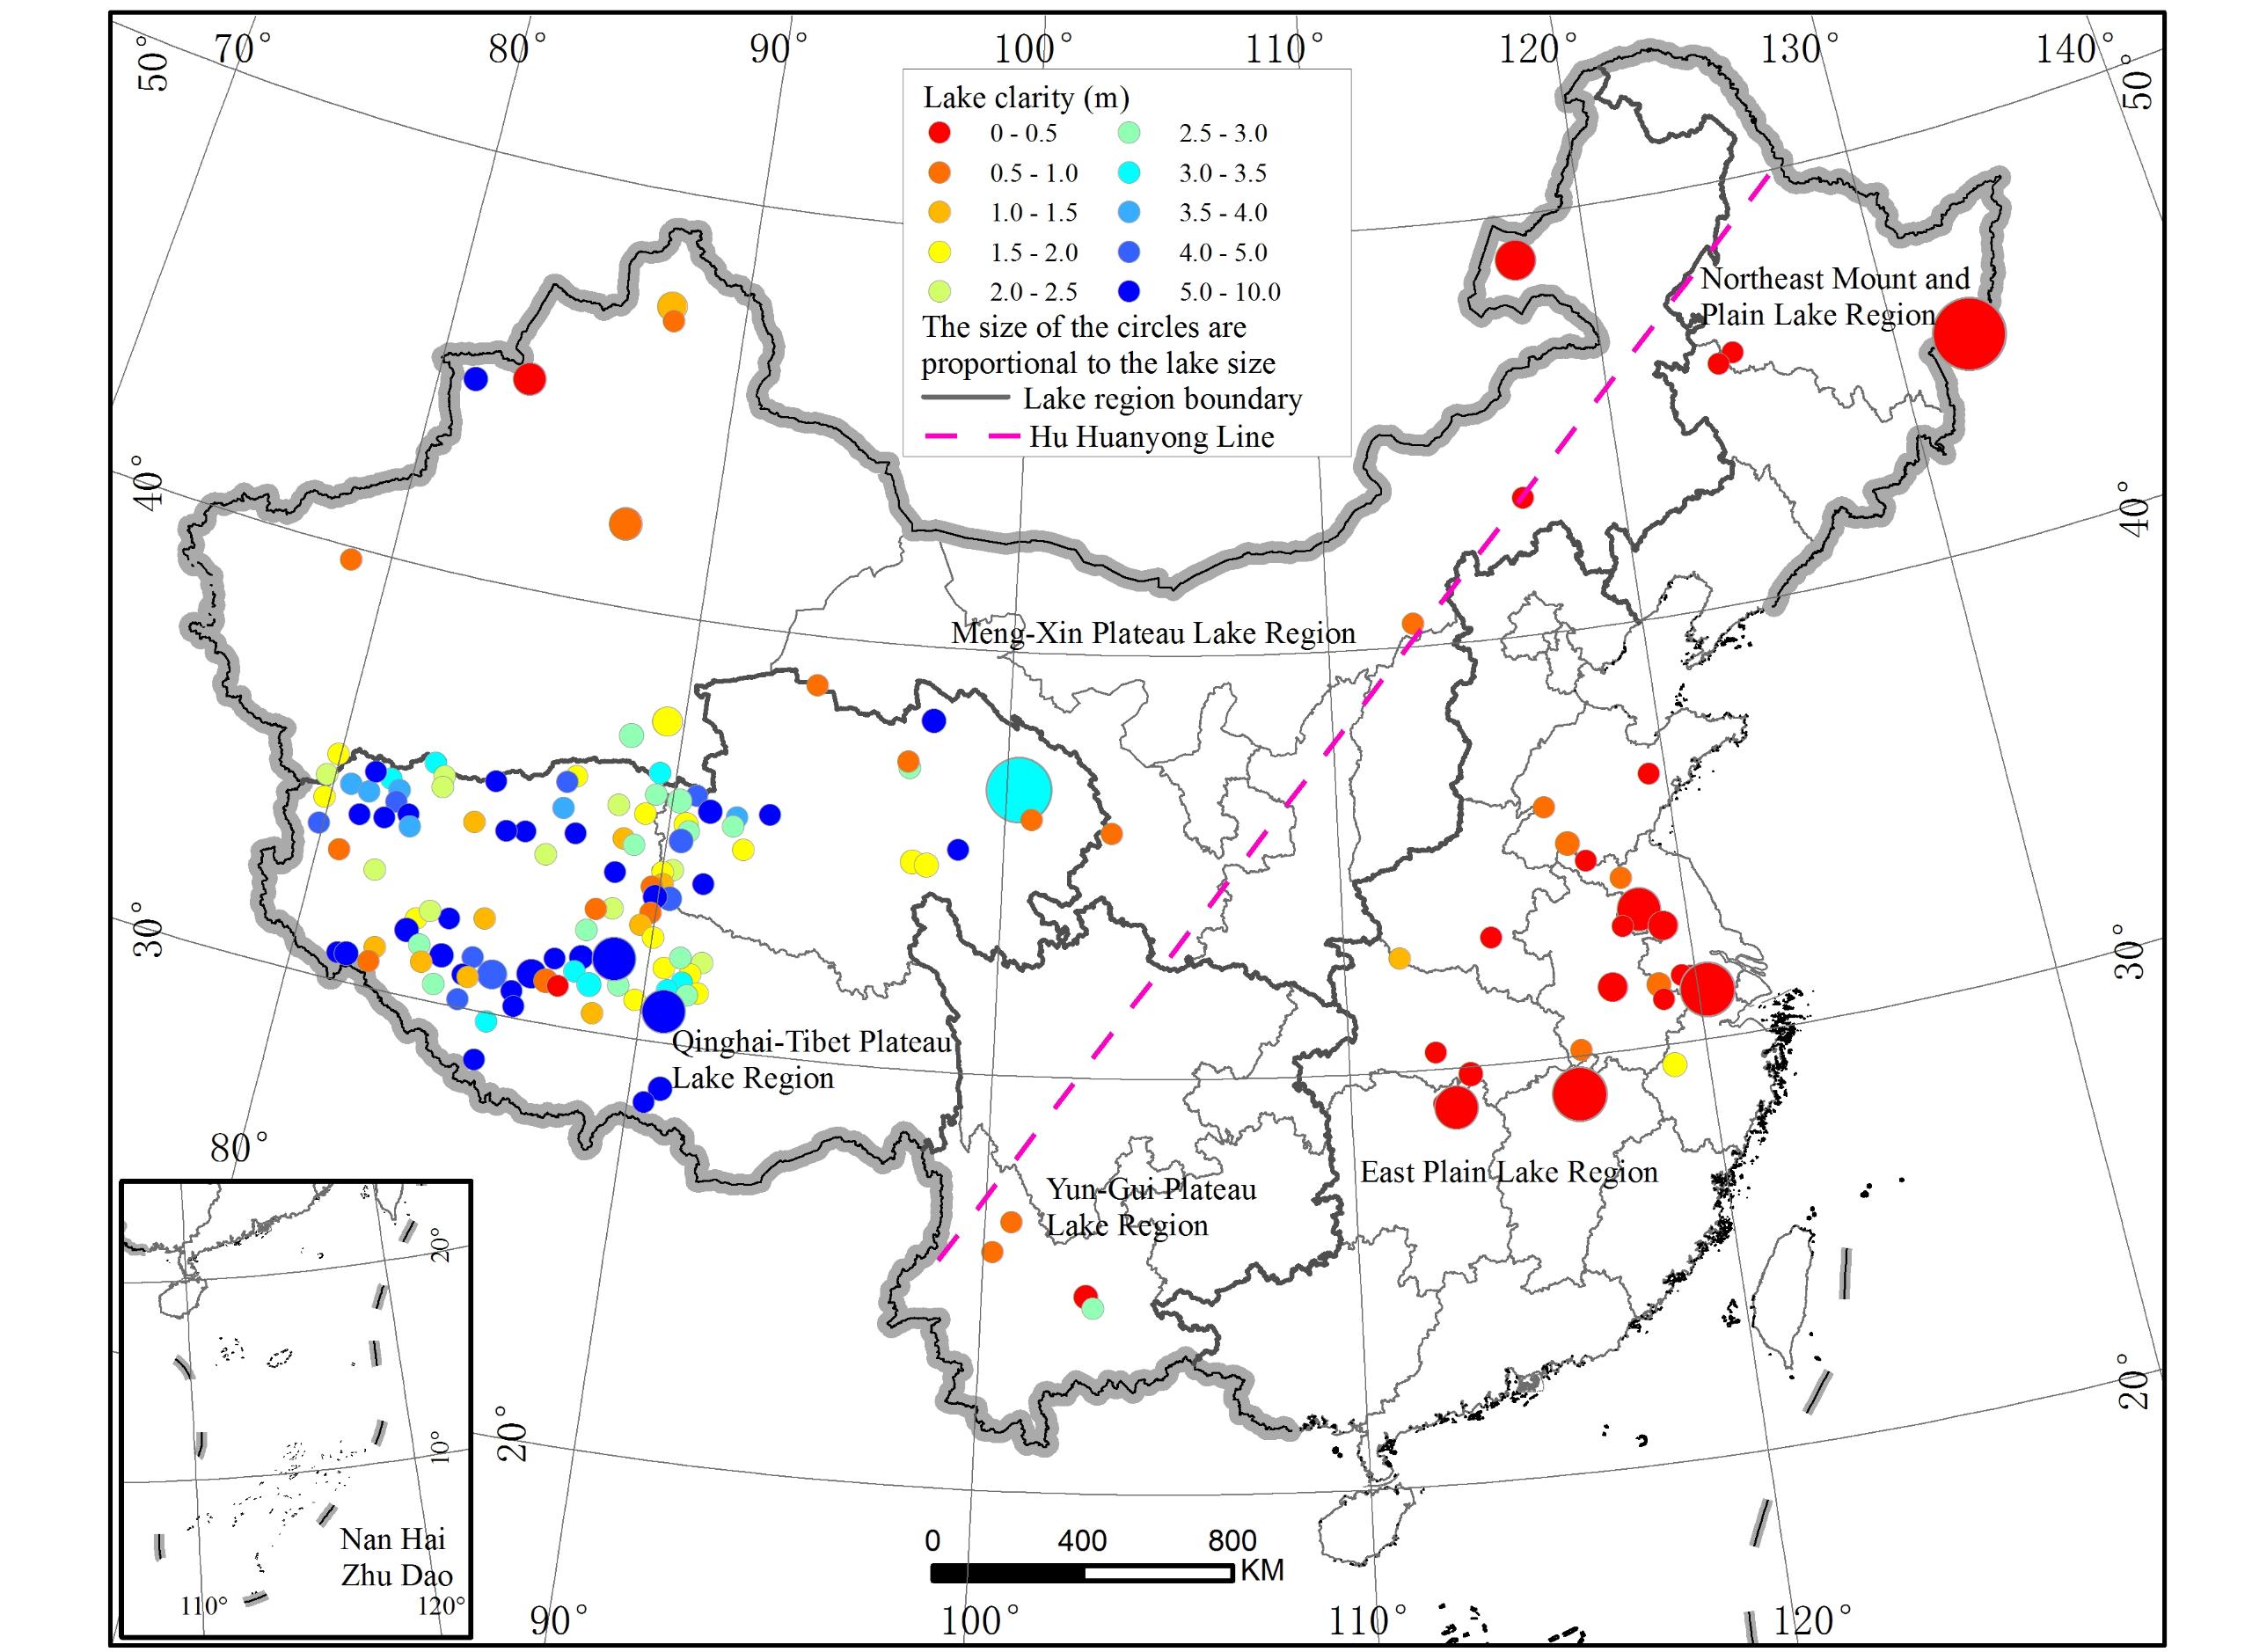 Remote Sensing Study Reveals Increasing Water Clarity of China's Lakes